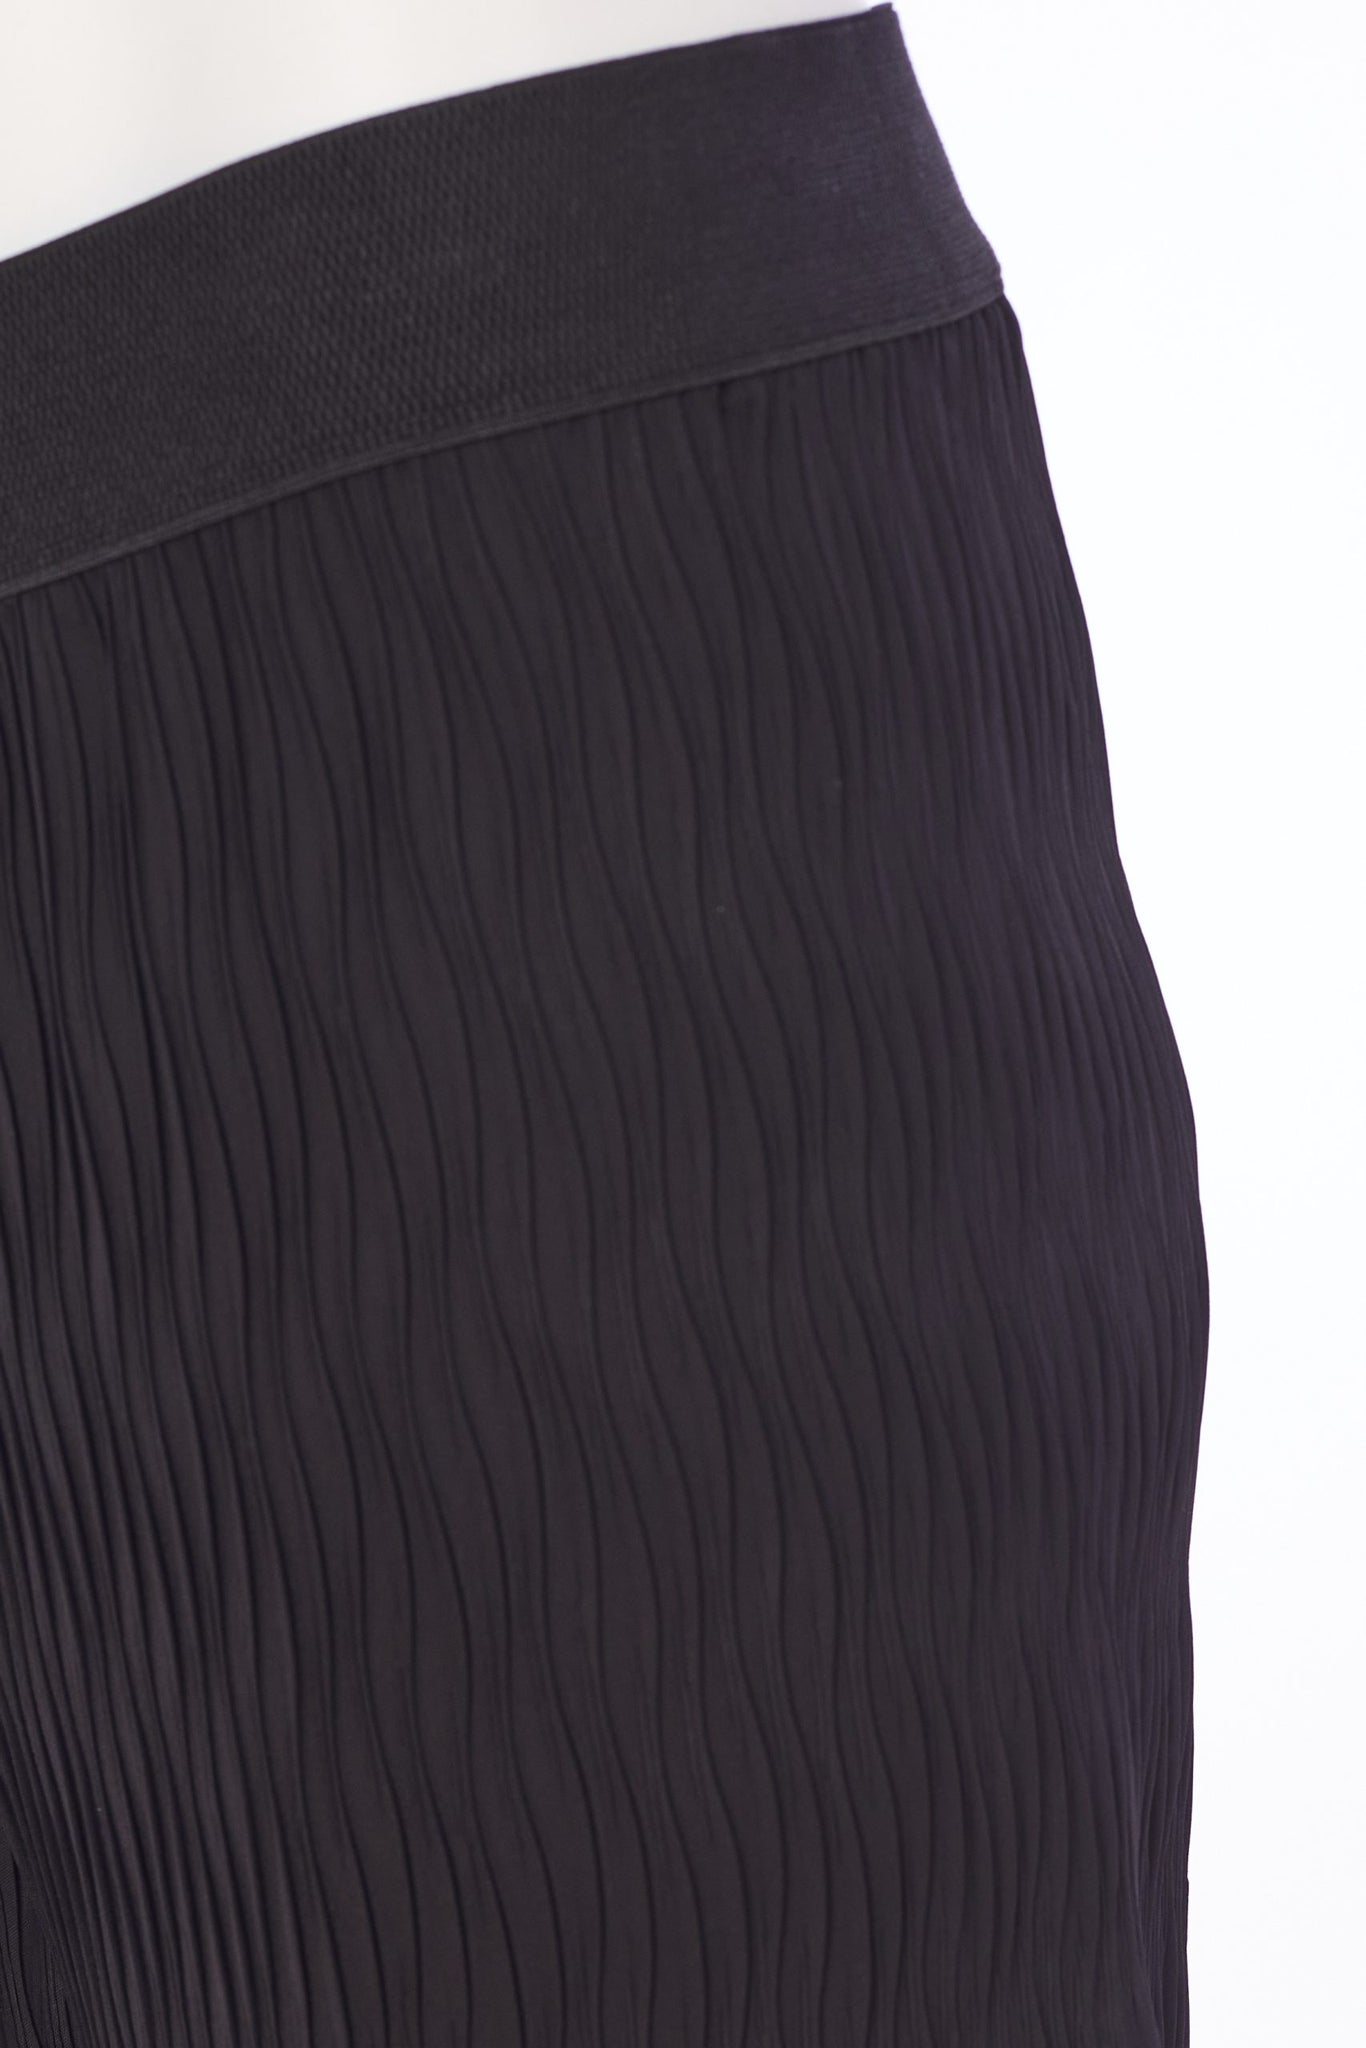 ORA wave pleated wide leg trousers in black, ORS24122 (detail)